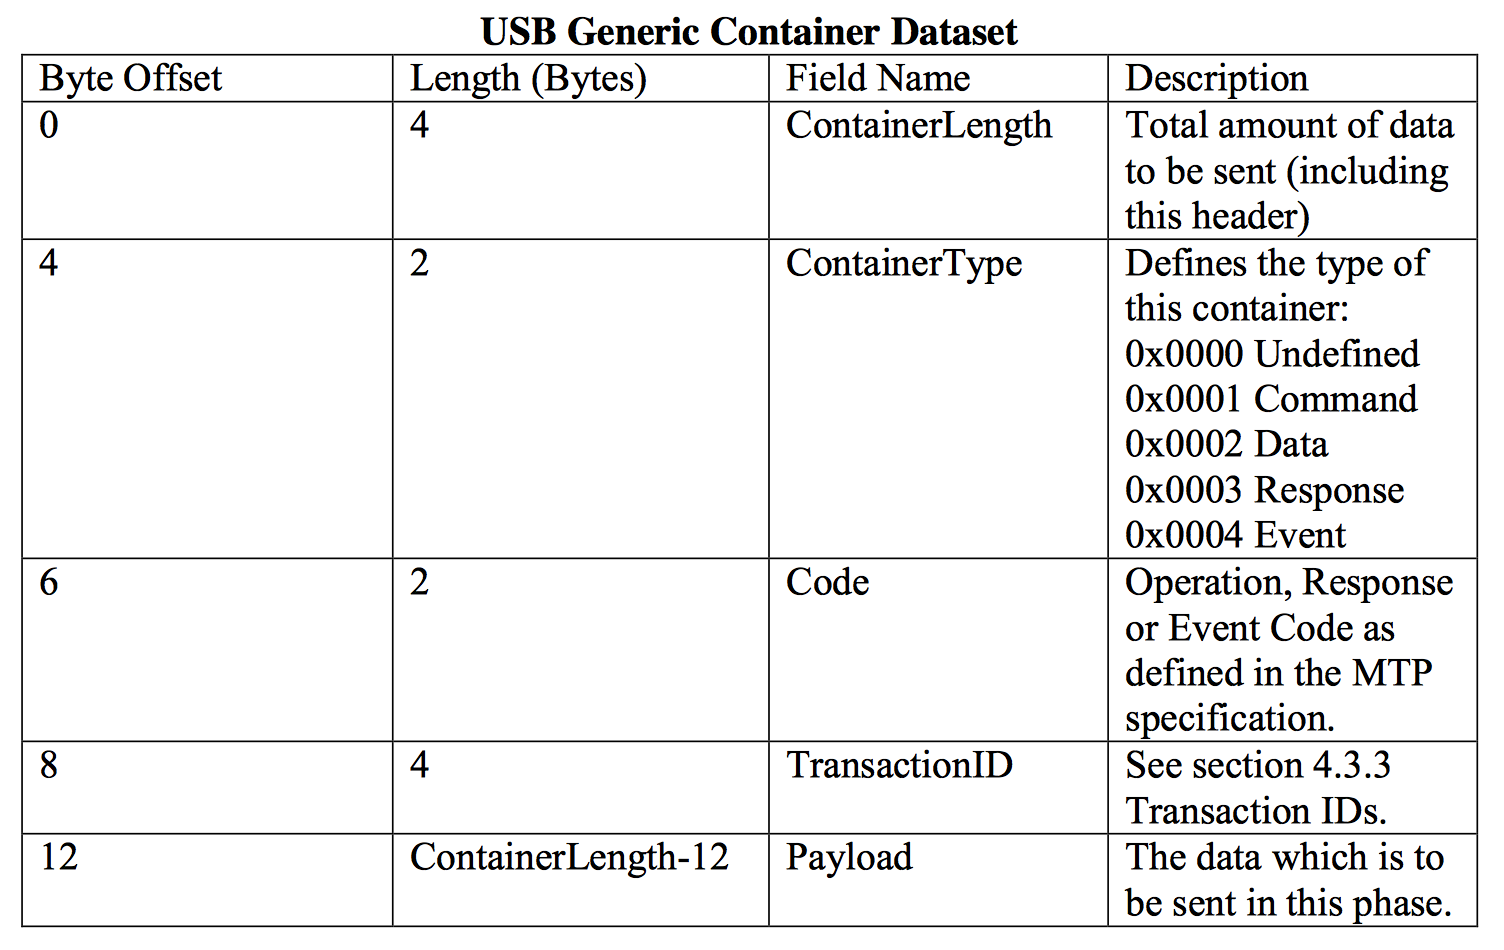 mtp_transfer_usb_container_dataset